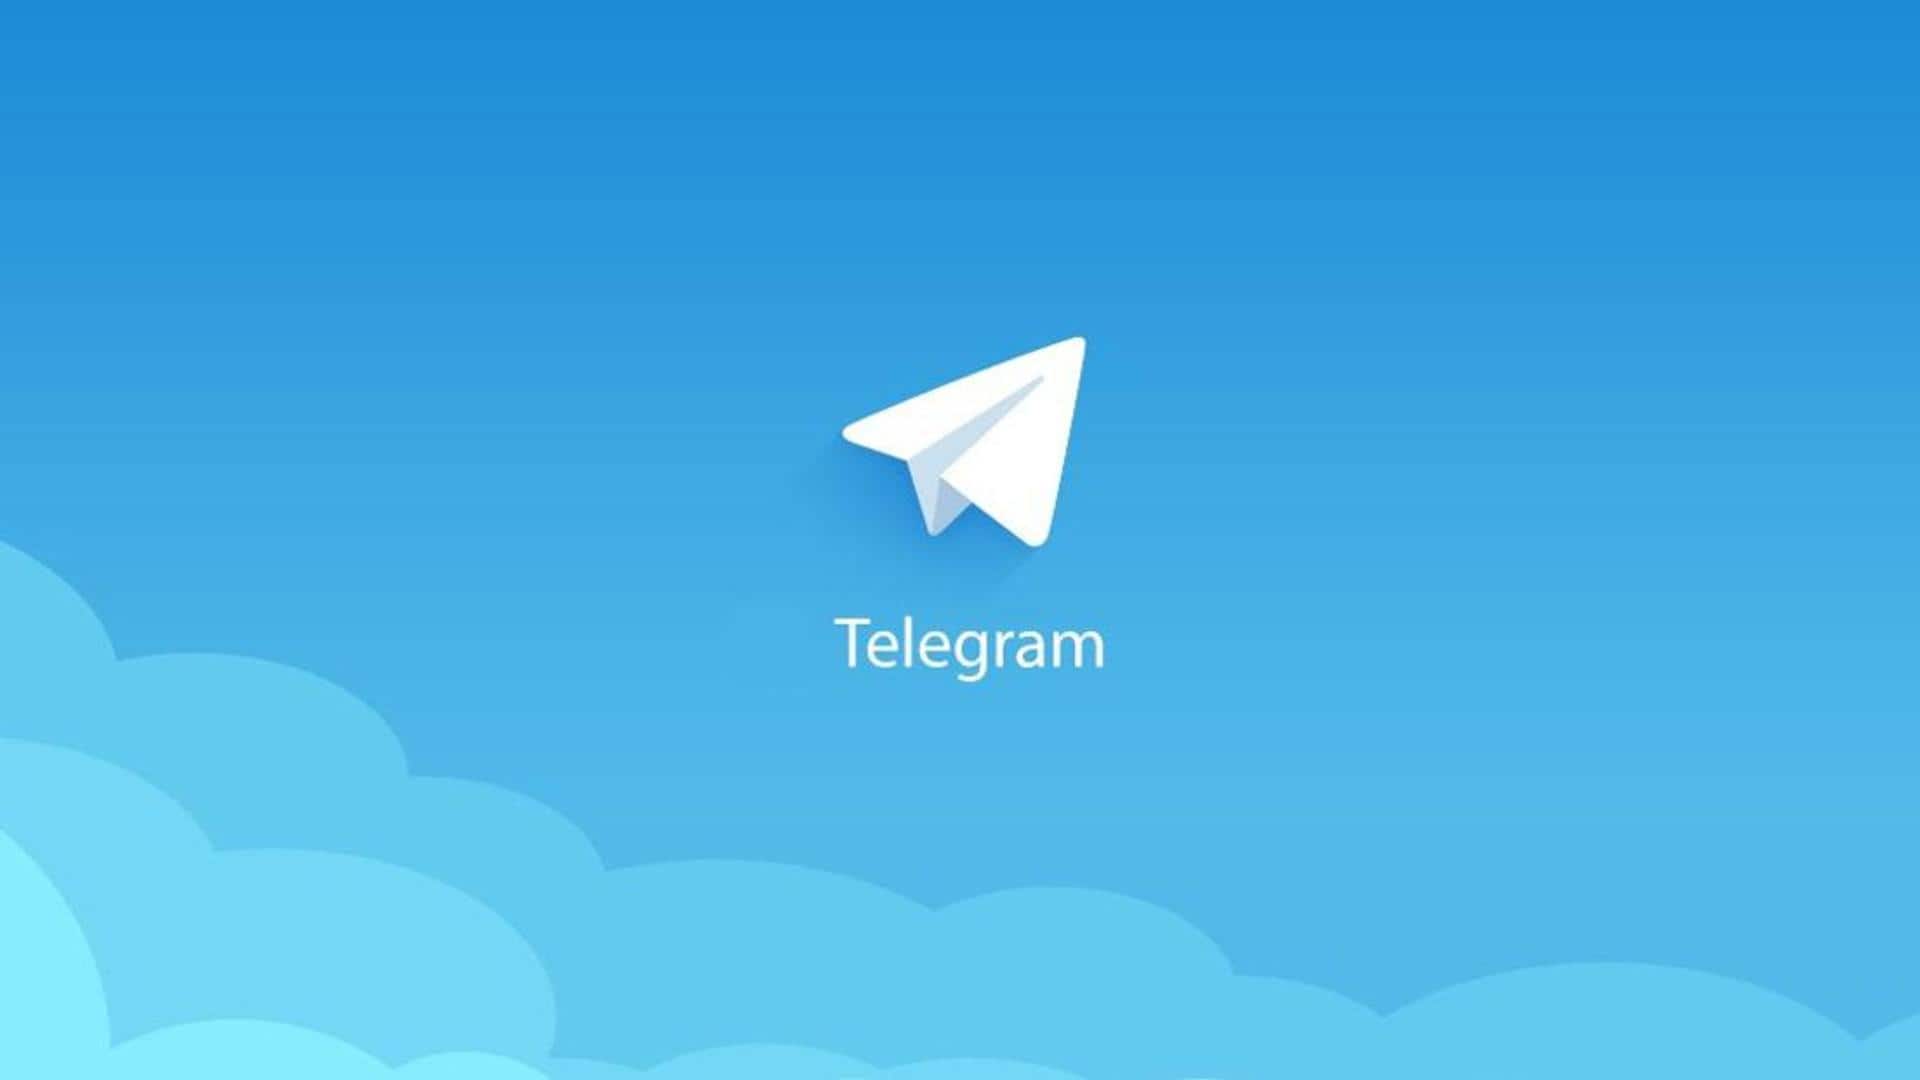 Telegram December update: No-SIM sign-up, upgraded topics, and more